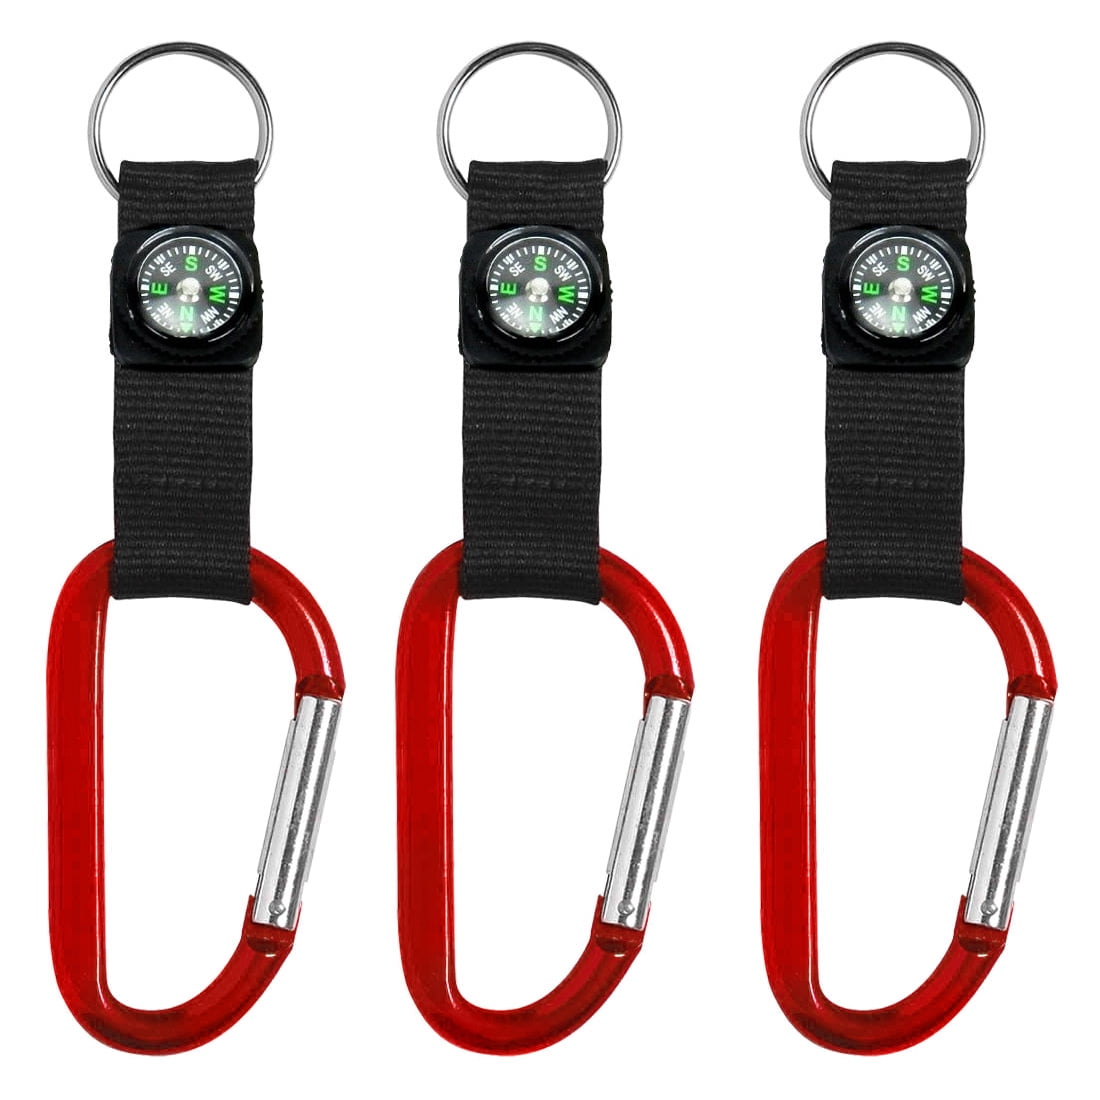 3 in 1 Multifunction Camping Hiking Carabiner w/ Keychain Compass Thermometer、VH 